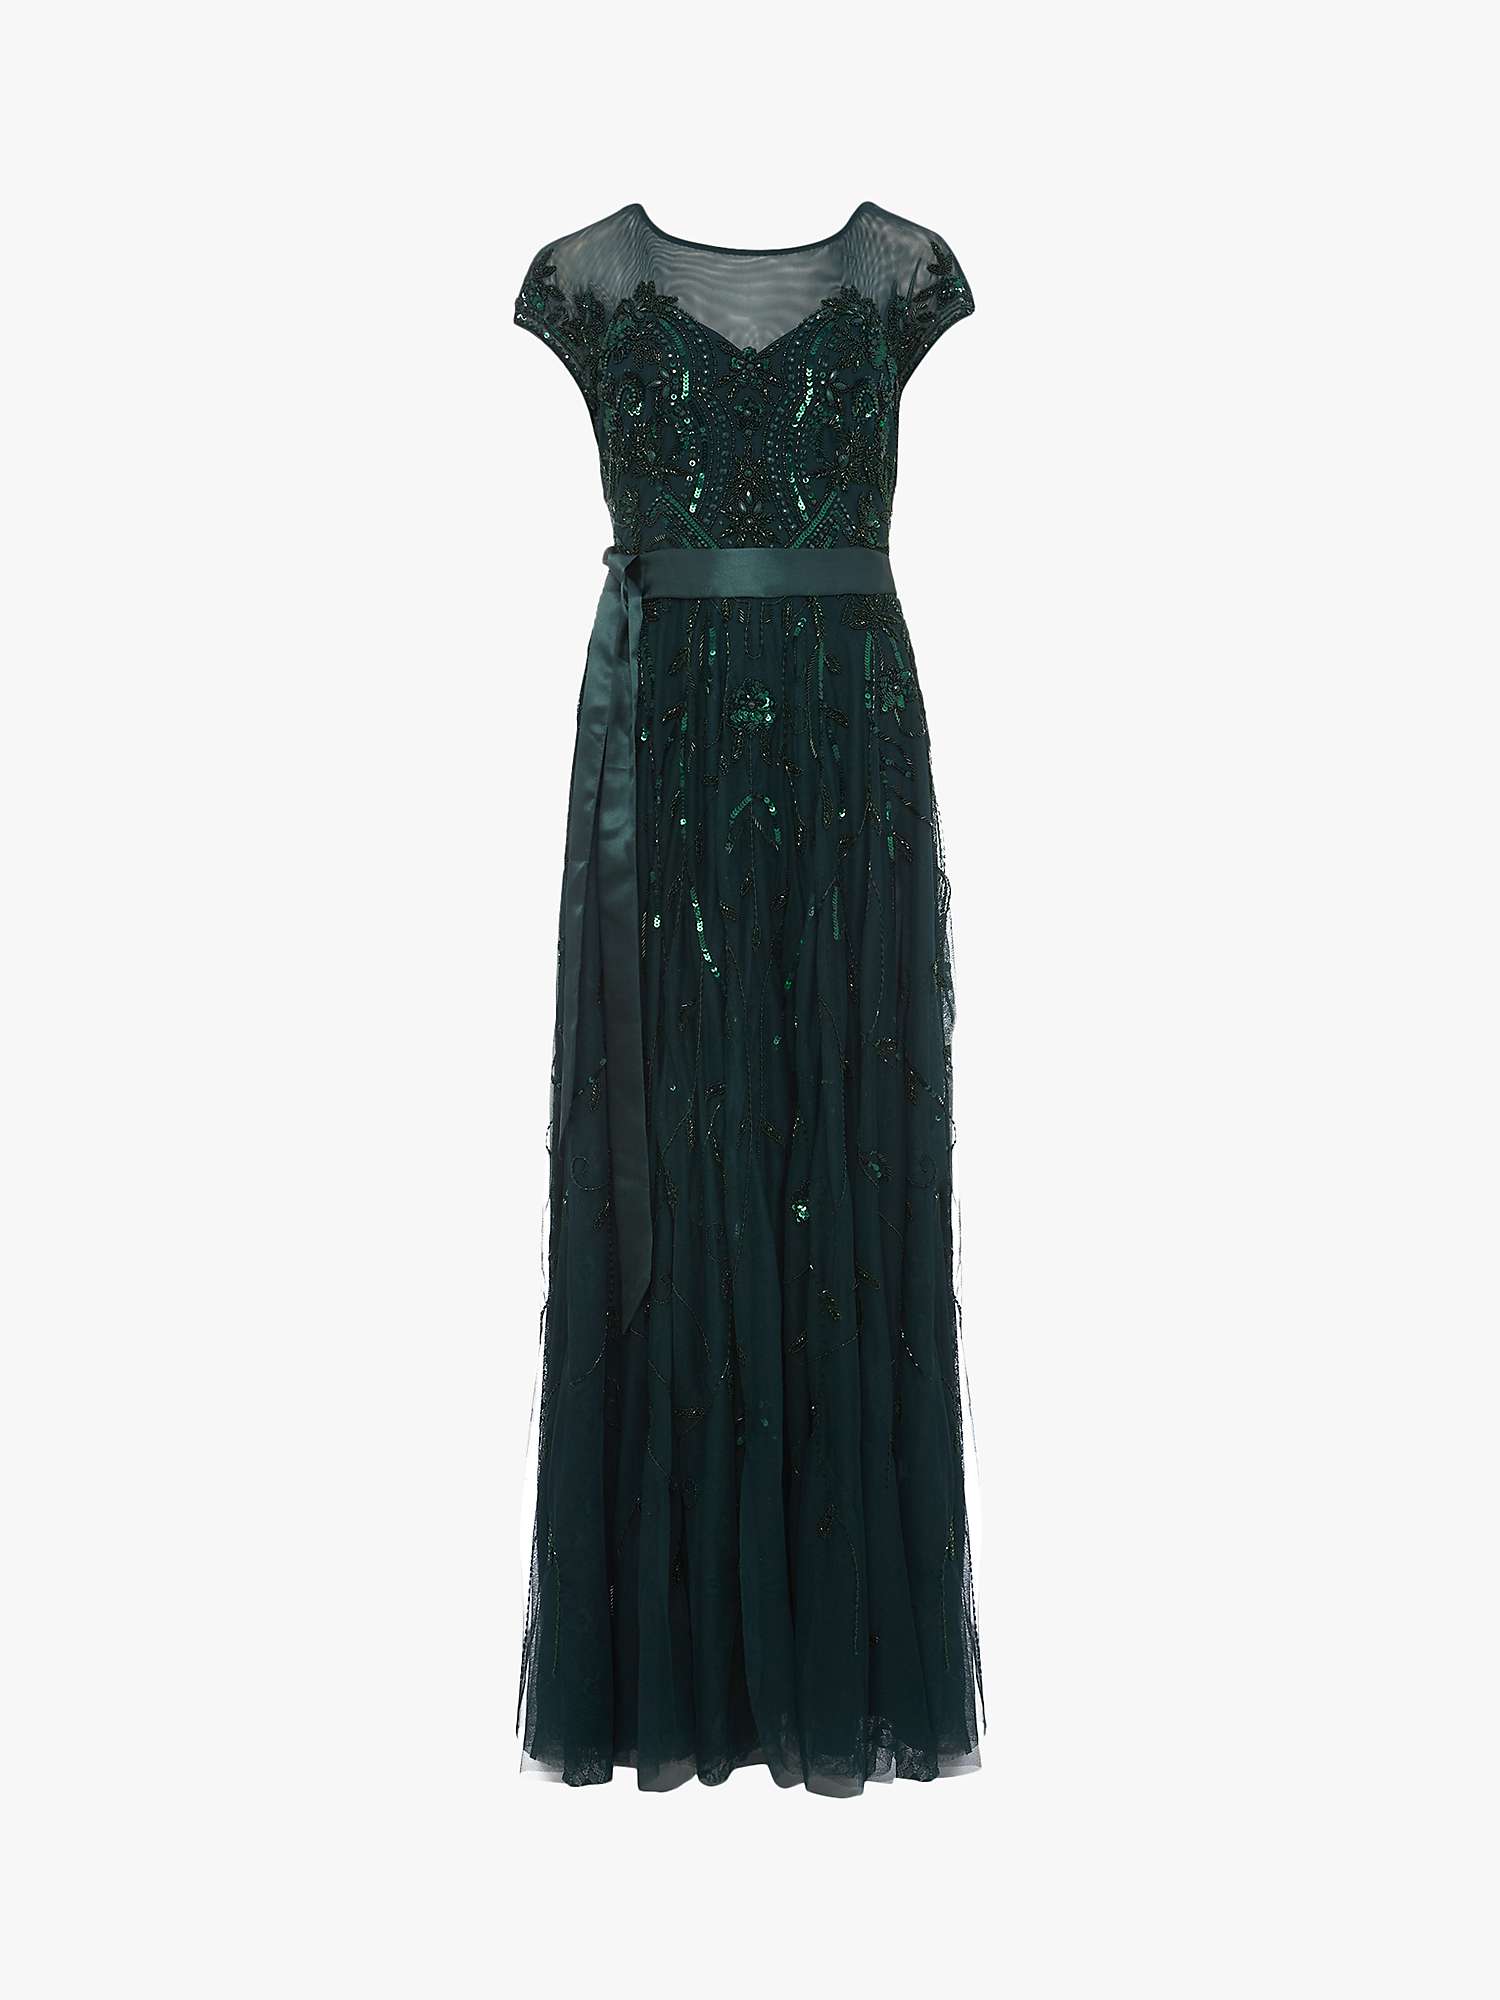 Buy Phase Eight Collection 8 Renee Embellished Maxi Dress, Emerald Online at johnlewis.com